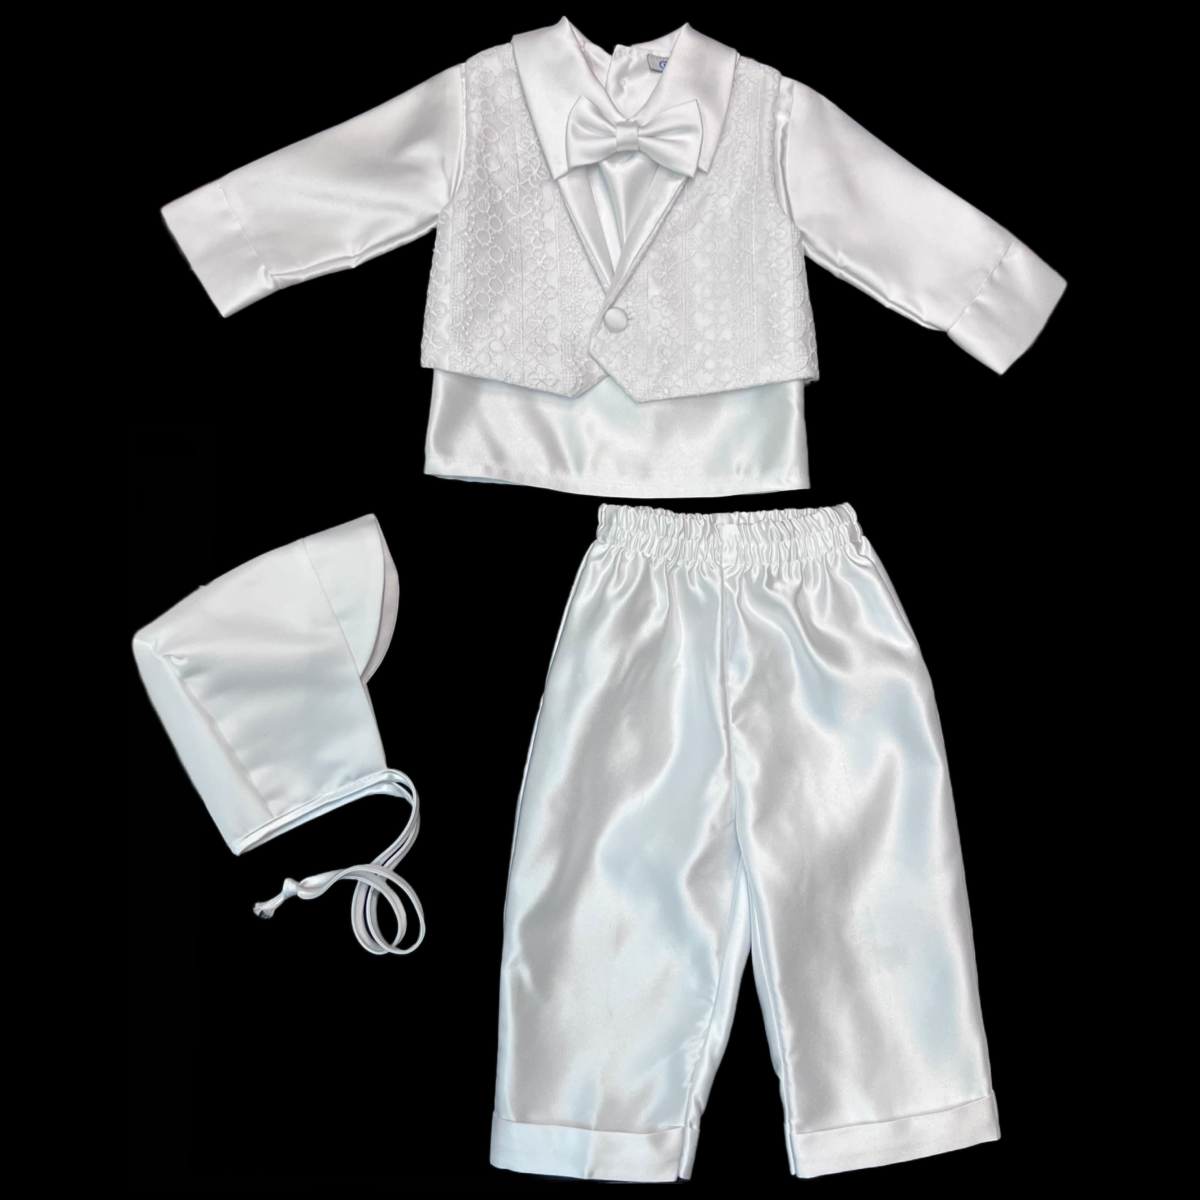 Lace Embroidery Baptism Outfit